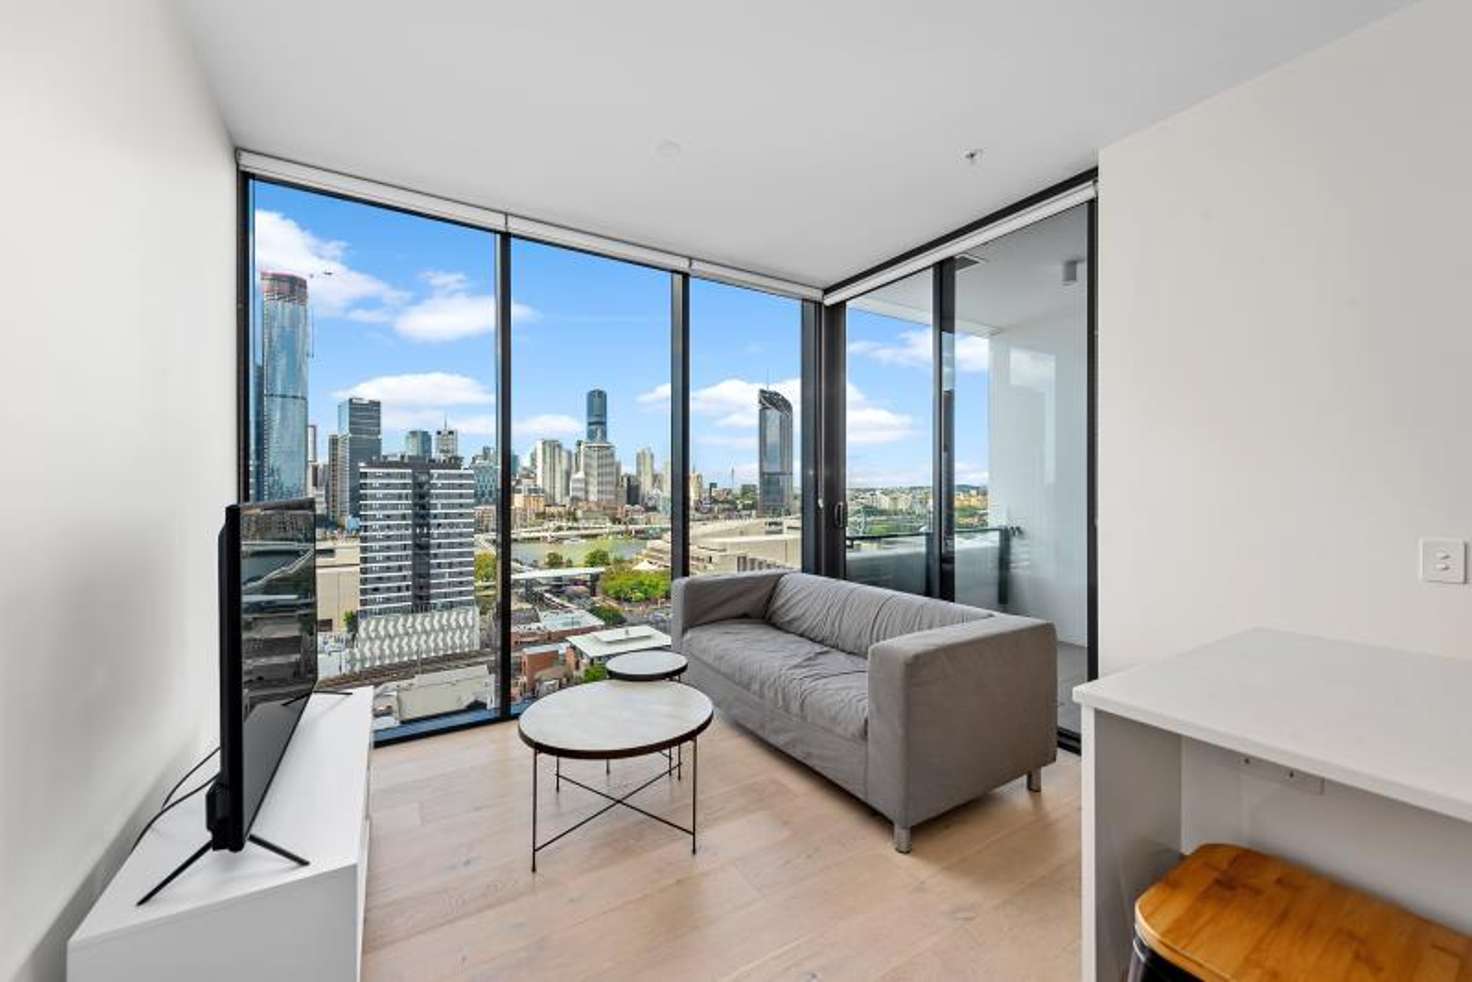 Main view of Homely apartment listing, 21703/28 Merivale Street, South Brisbane QLD 4101